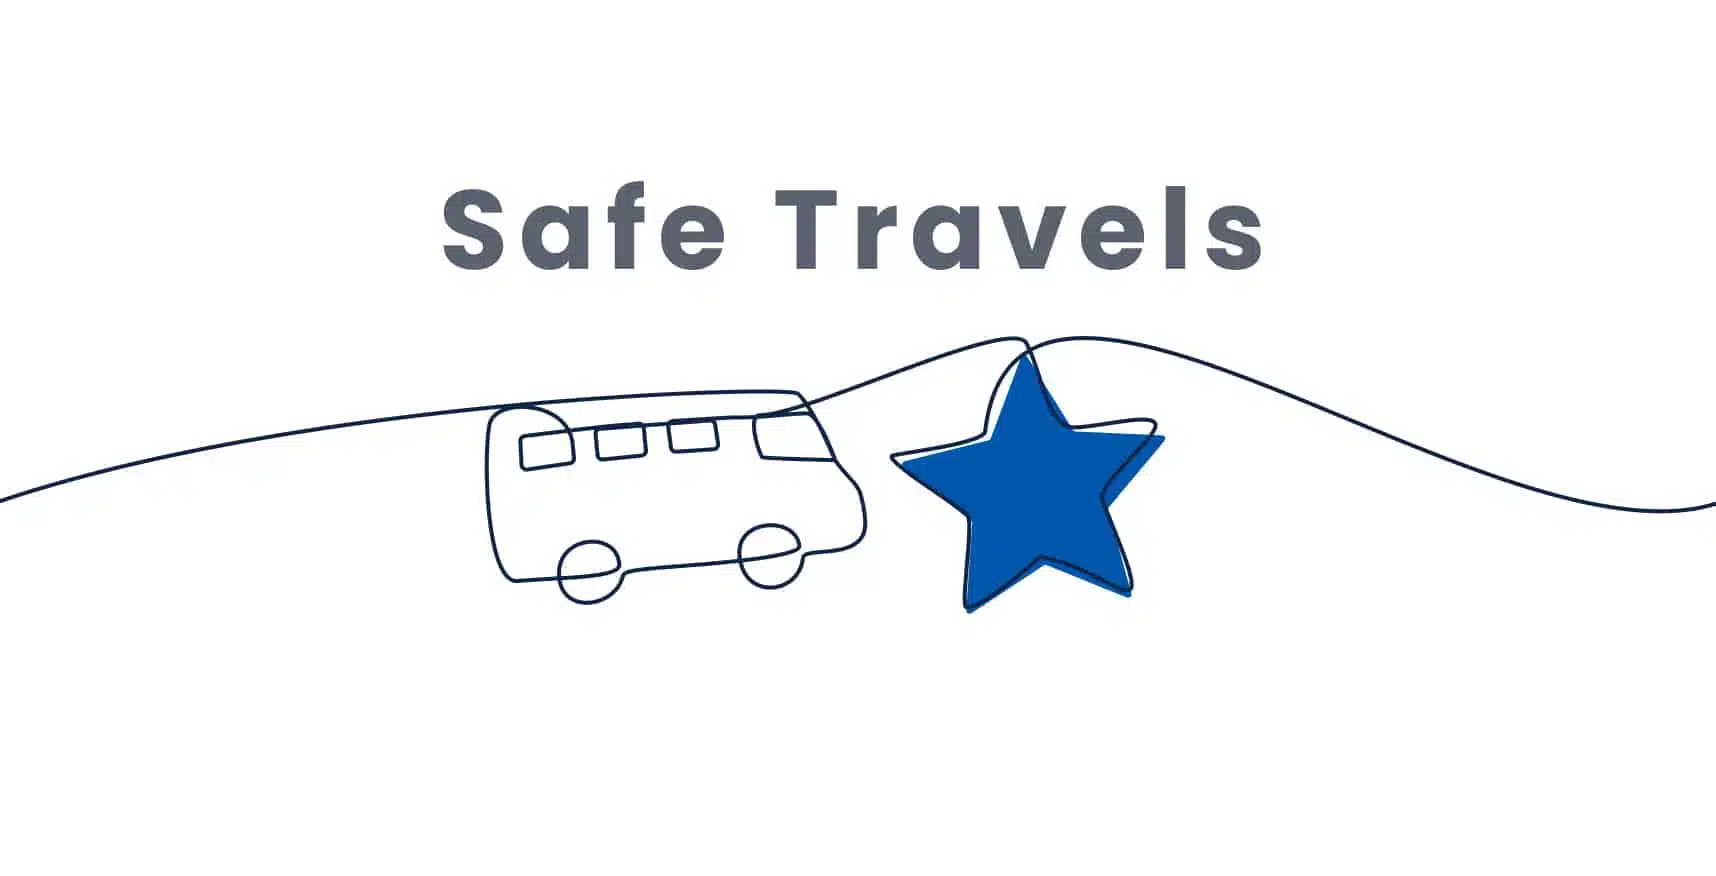 A minimalist graphic featuring a blue line that forms a road with a white bus and a star, and the text "Safe Travels" above.